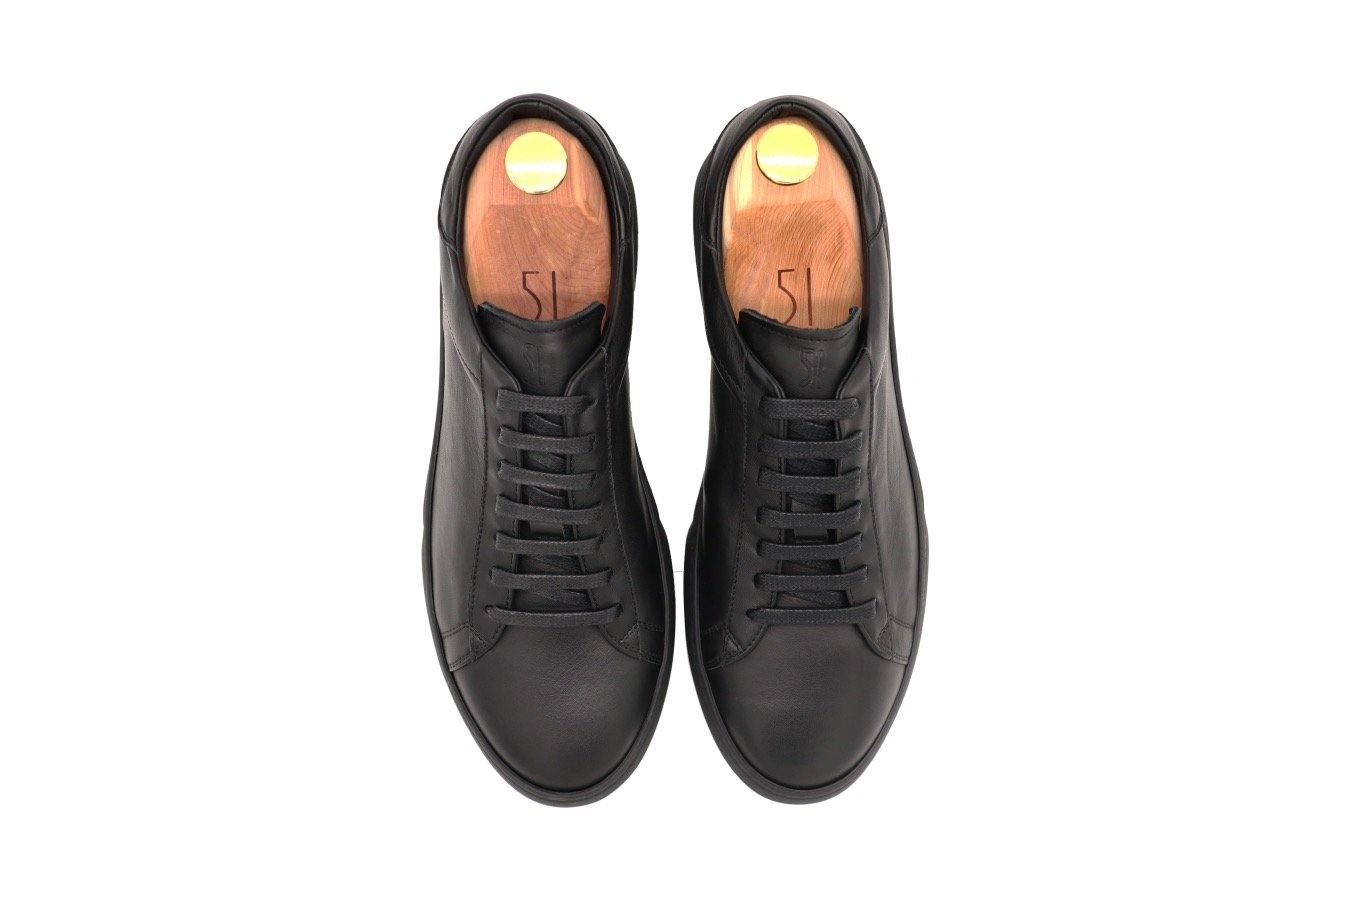 Top View of Mens Leather Low Top Black Sneakers